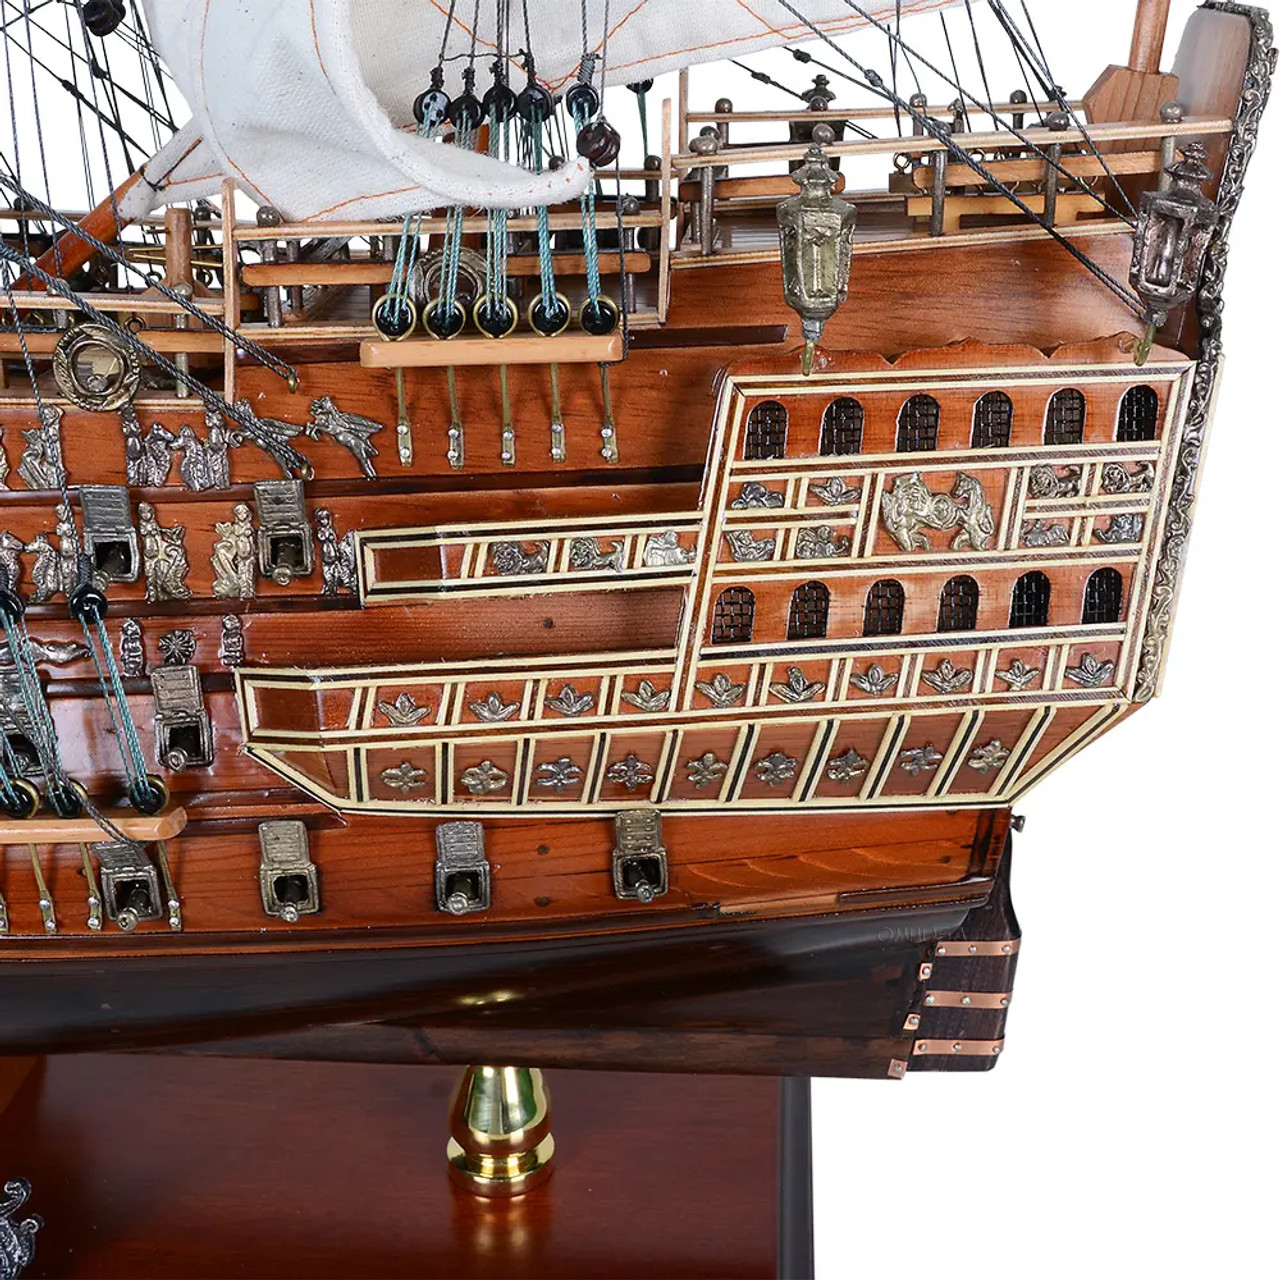 Limited Edition HMS Sovereign of the Seas Full Blowing Sails Model